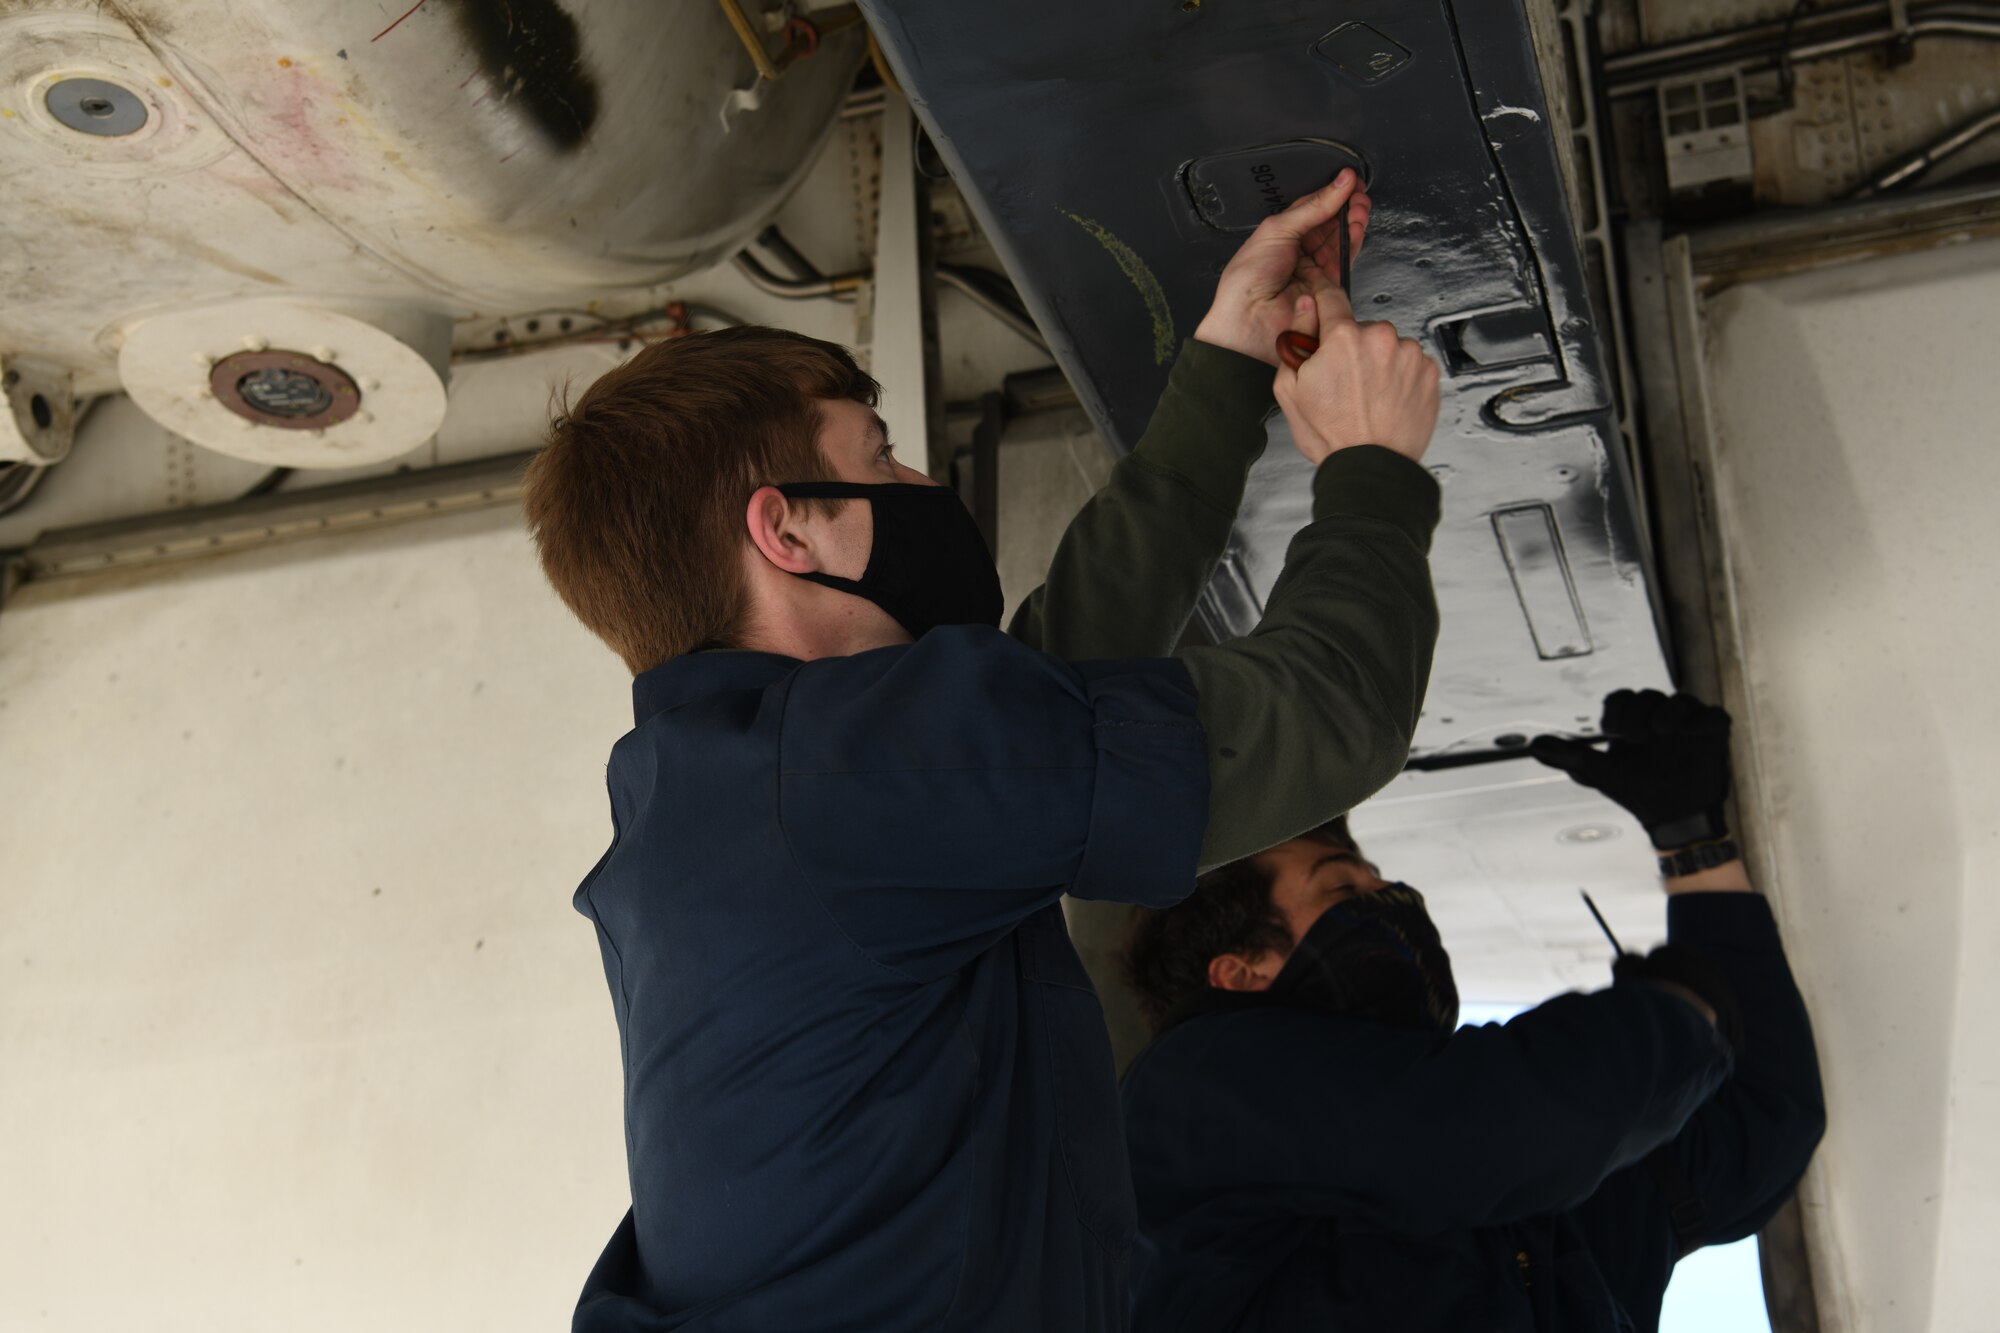 Airmen assigned to the 28th Aircraft Maintenance Unit inspect a B-1B Lancer prior to a non-stop deployment from Ellsworth Air Force Base, S.D., May 4, 2020. The Department of Defense maintains command and control of its bomber forces for any mission, anywhere in the world, at any time. (U.S. Air Force photo by Senior Airman Nicolas Z. Erwin)